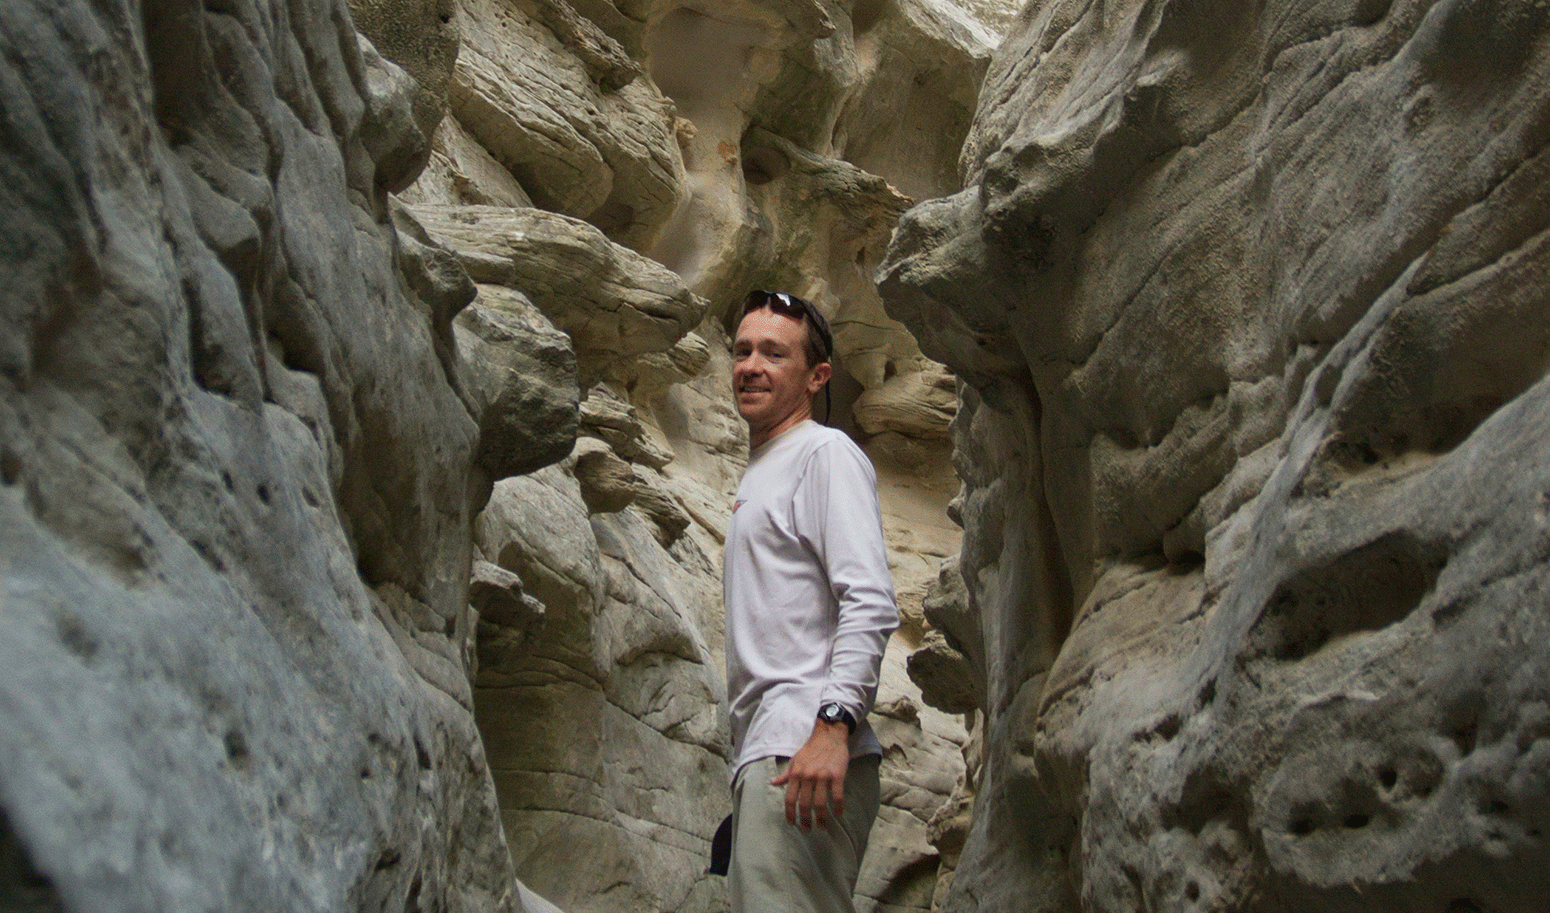 Joe Zimmermann, adventurer, idea man behind the Blackwater Drifters Expedition, and Mountainsmith Ambassador pictured hiking through a slot canyon in a white long sleeve shirt and khaki pants.